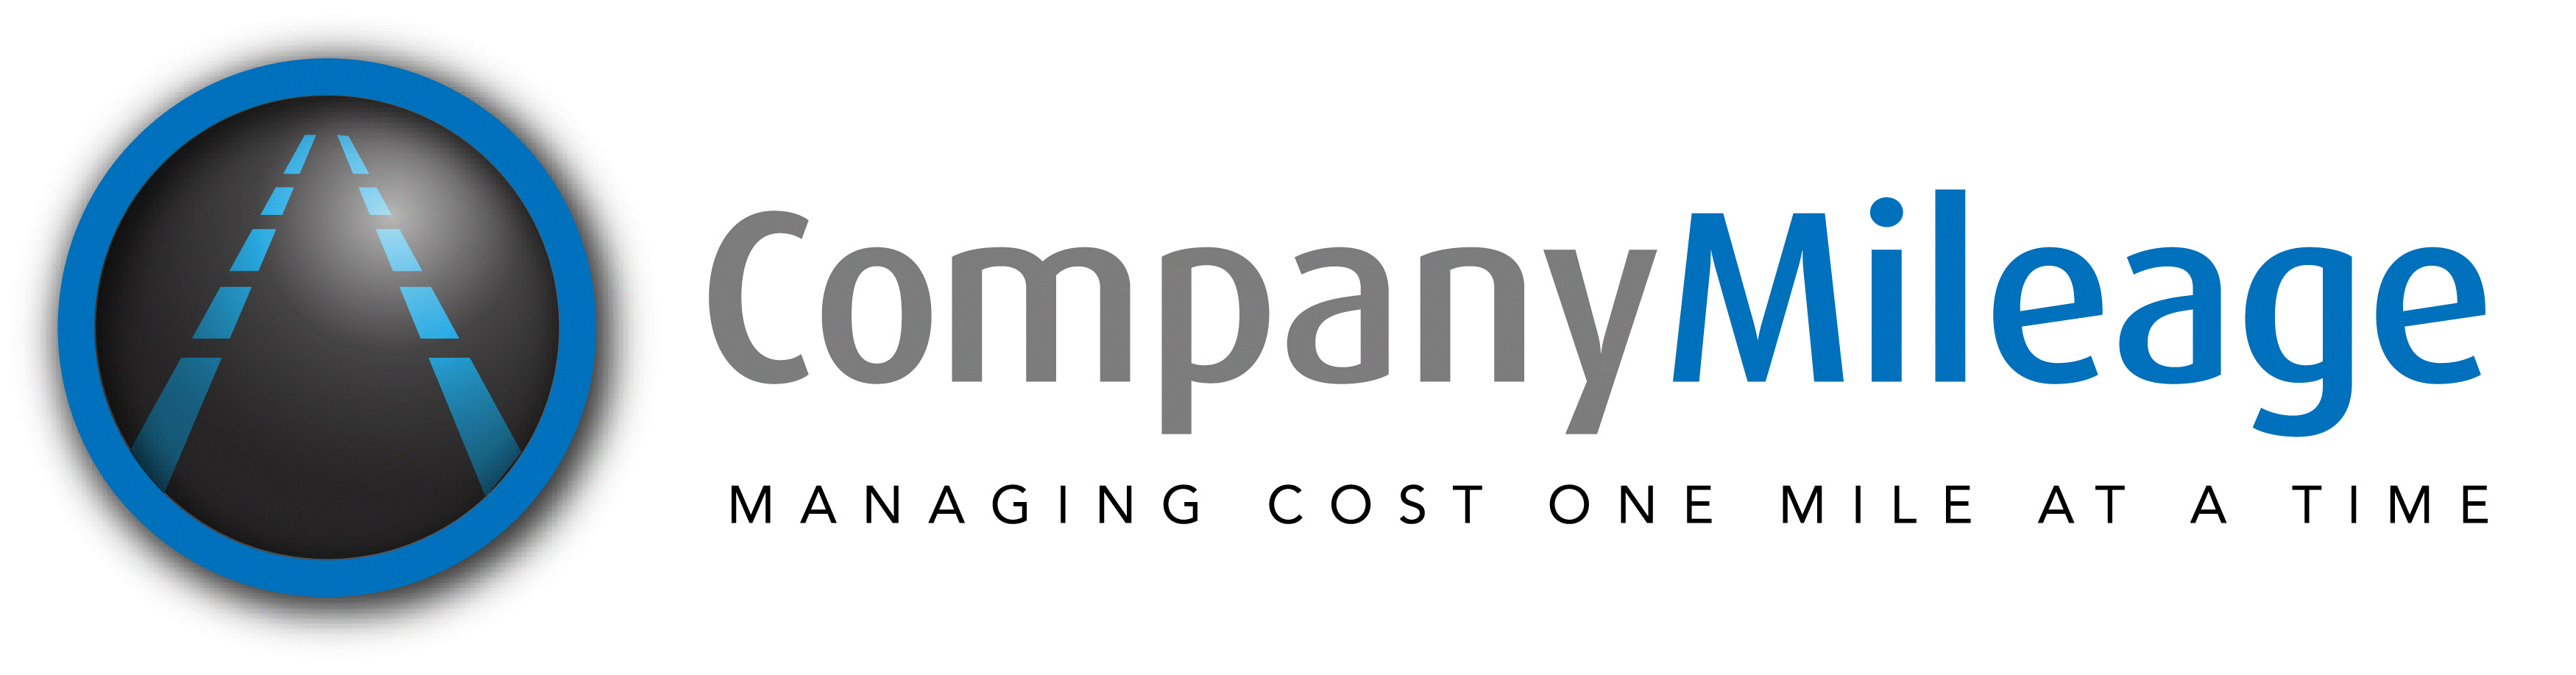 Featured Image for CompanyMileage